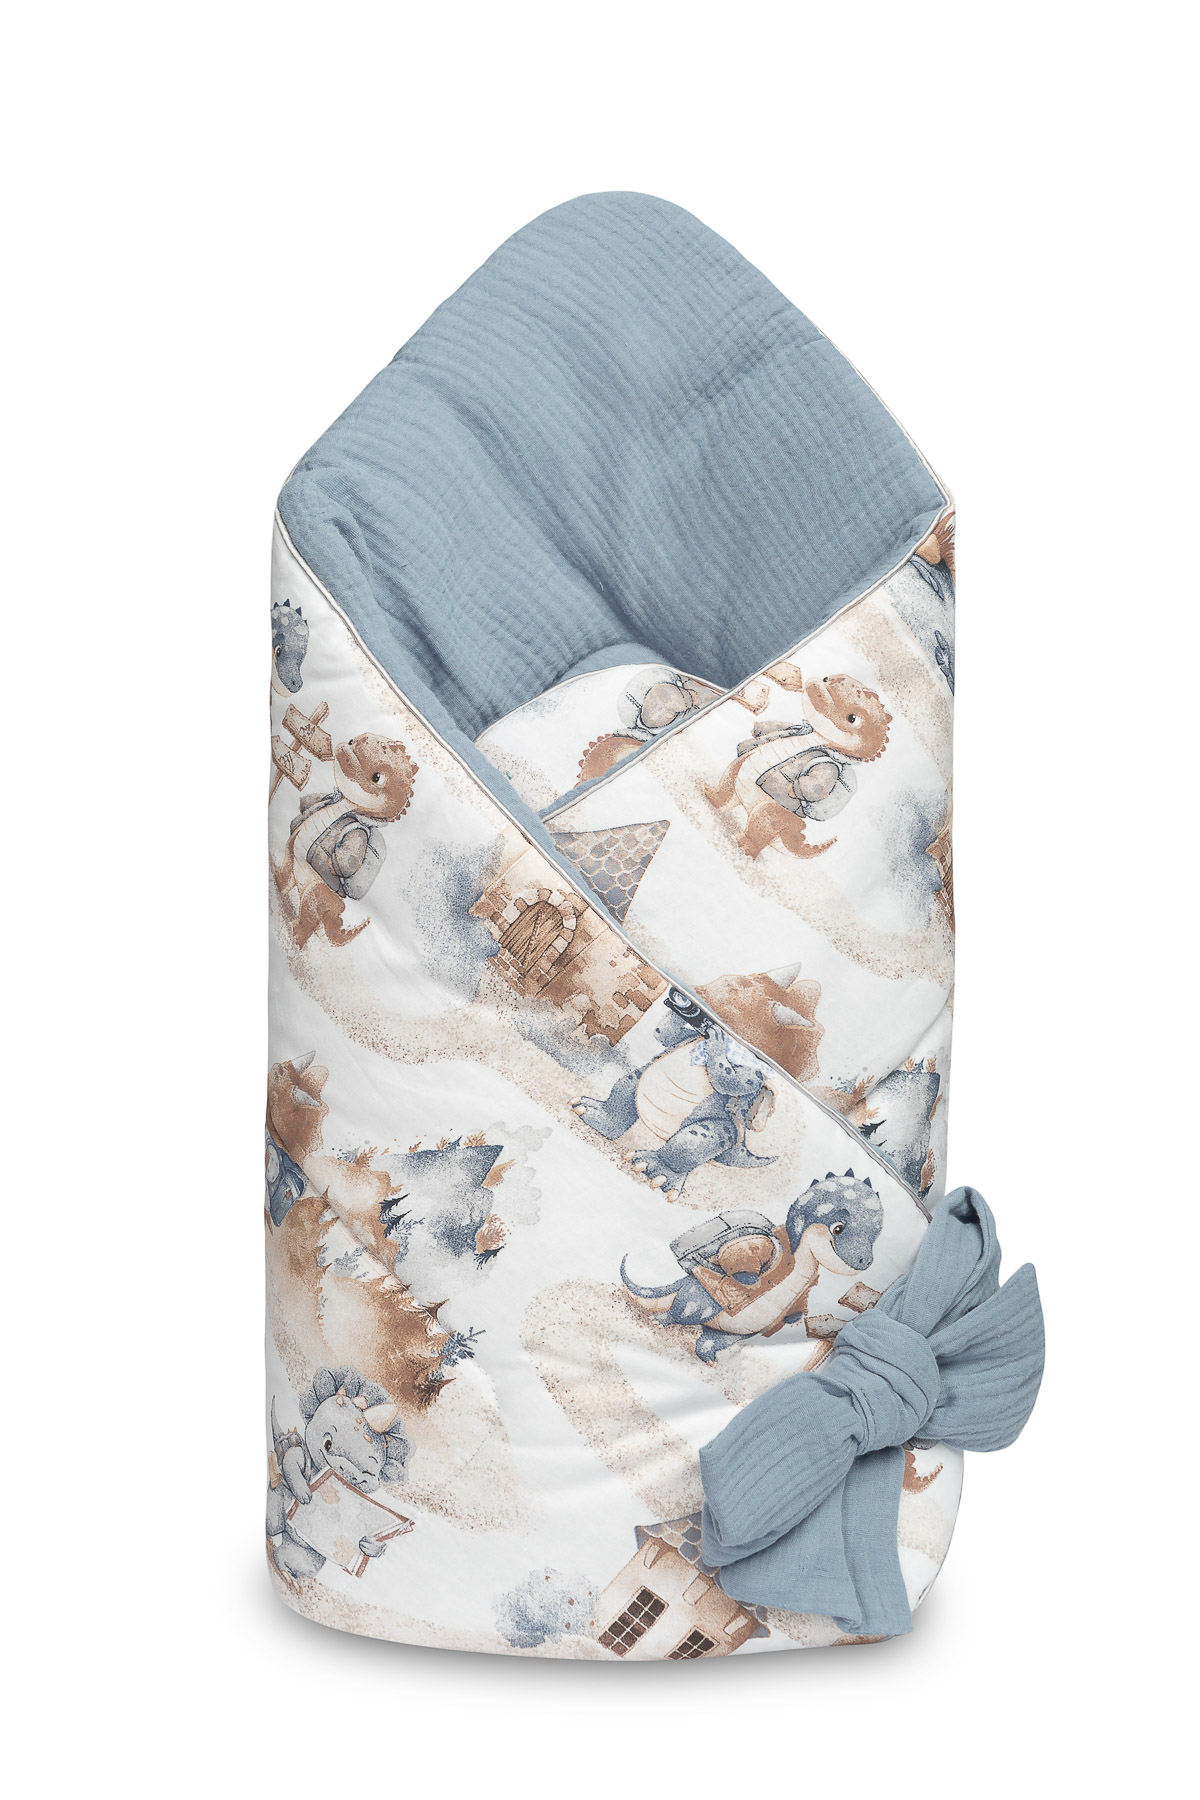 Muslin baby nest cone wrap 75×75 Jeans – Dragons